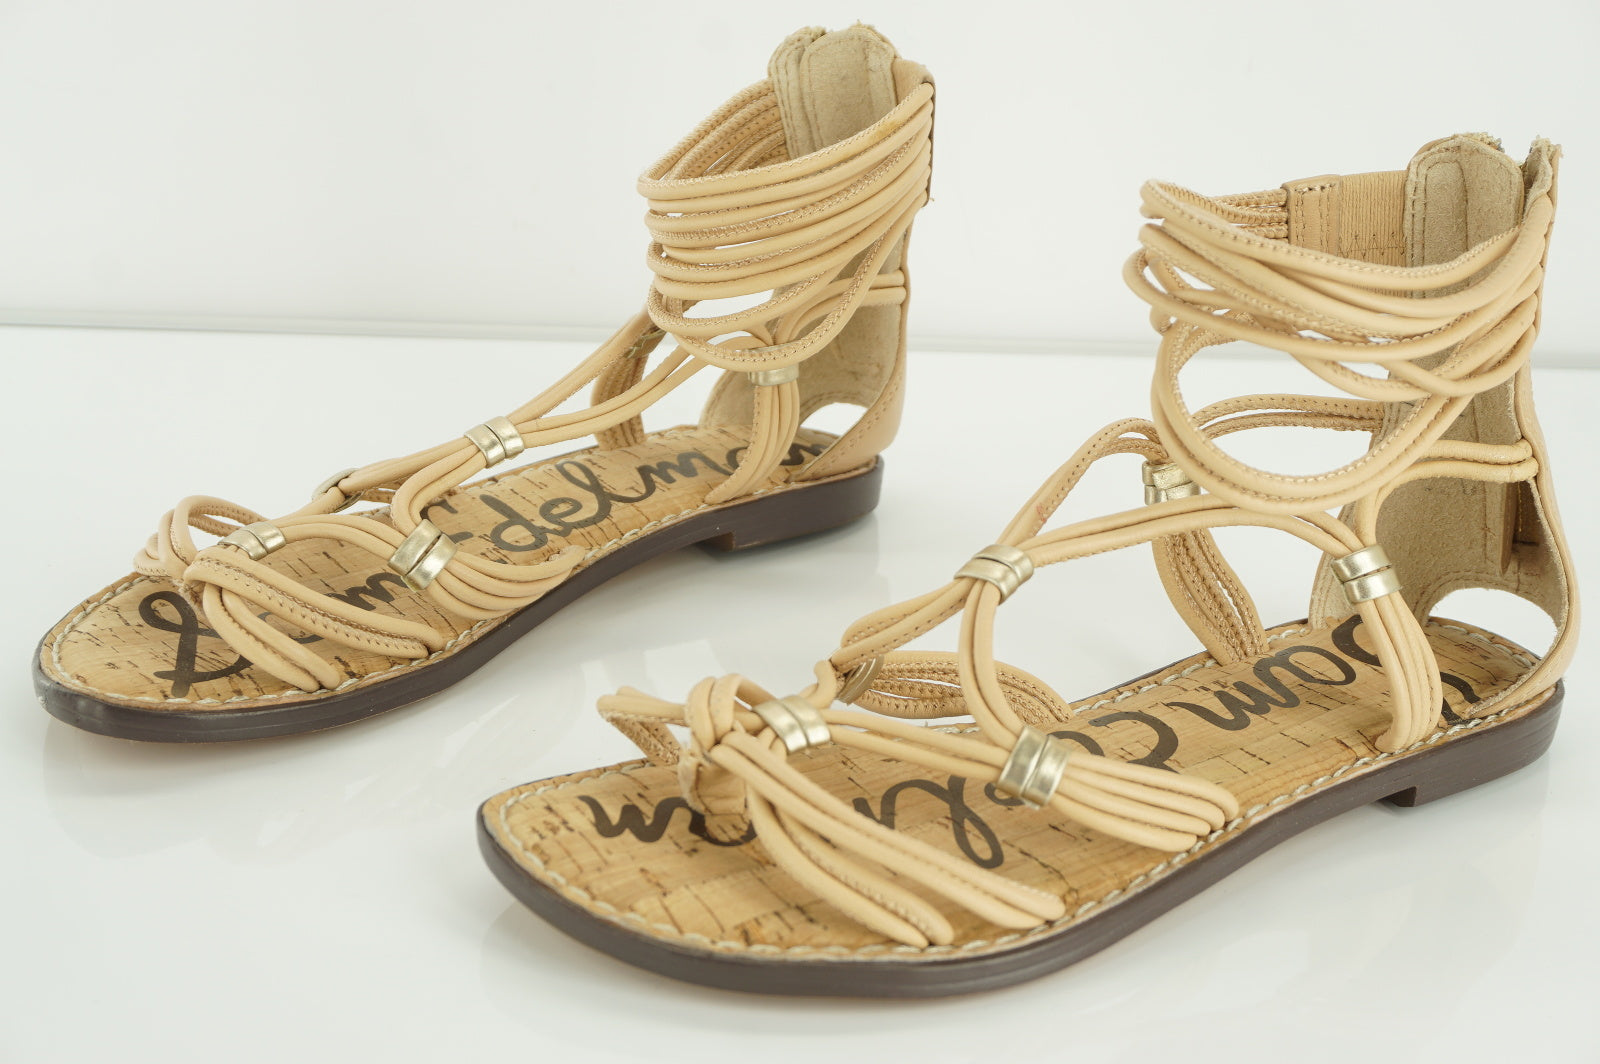 Sam Edelman Gianni Beige Leather Ankle Strappy Flat Caged Sandal SZ 5.5 New $110